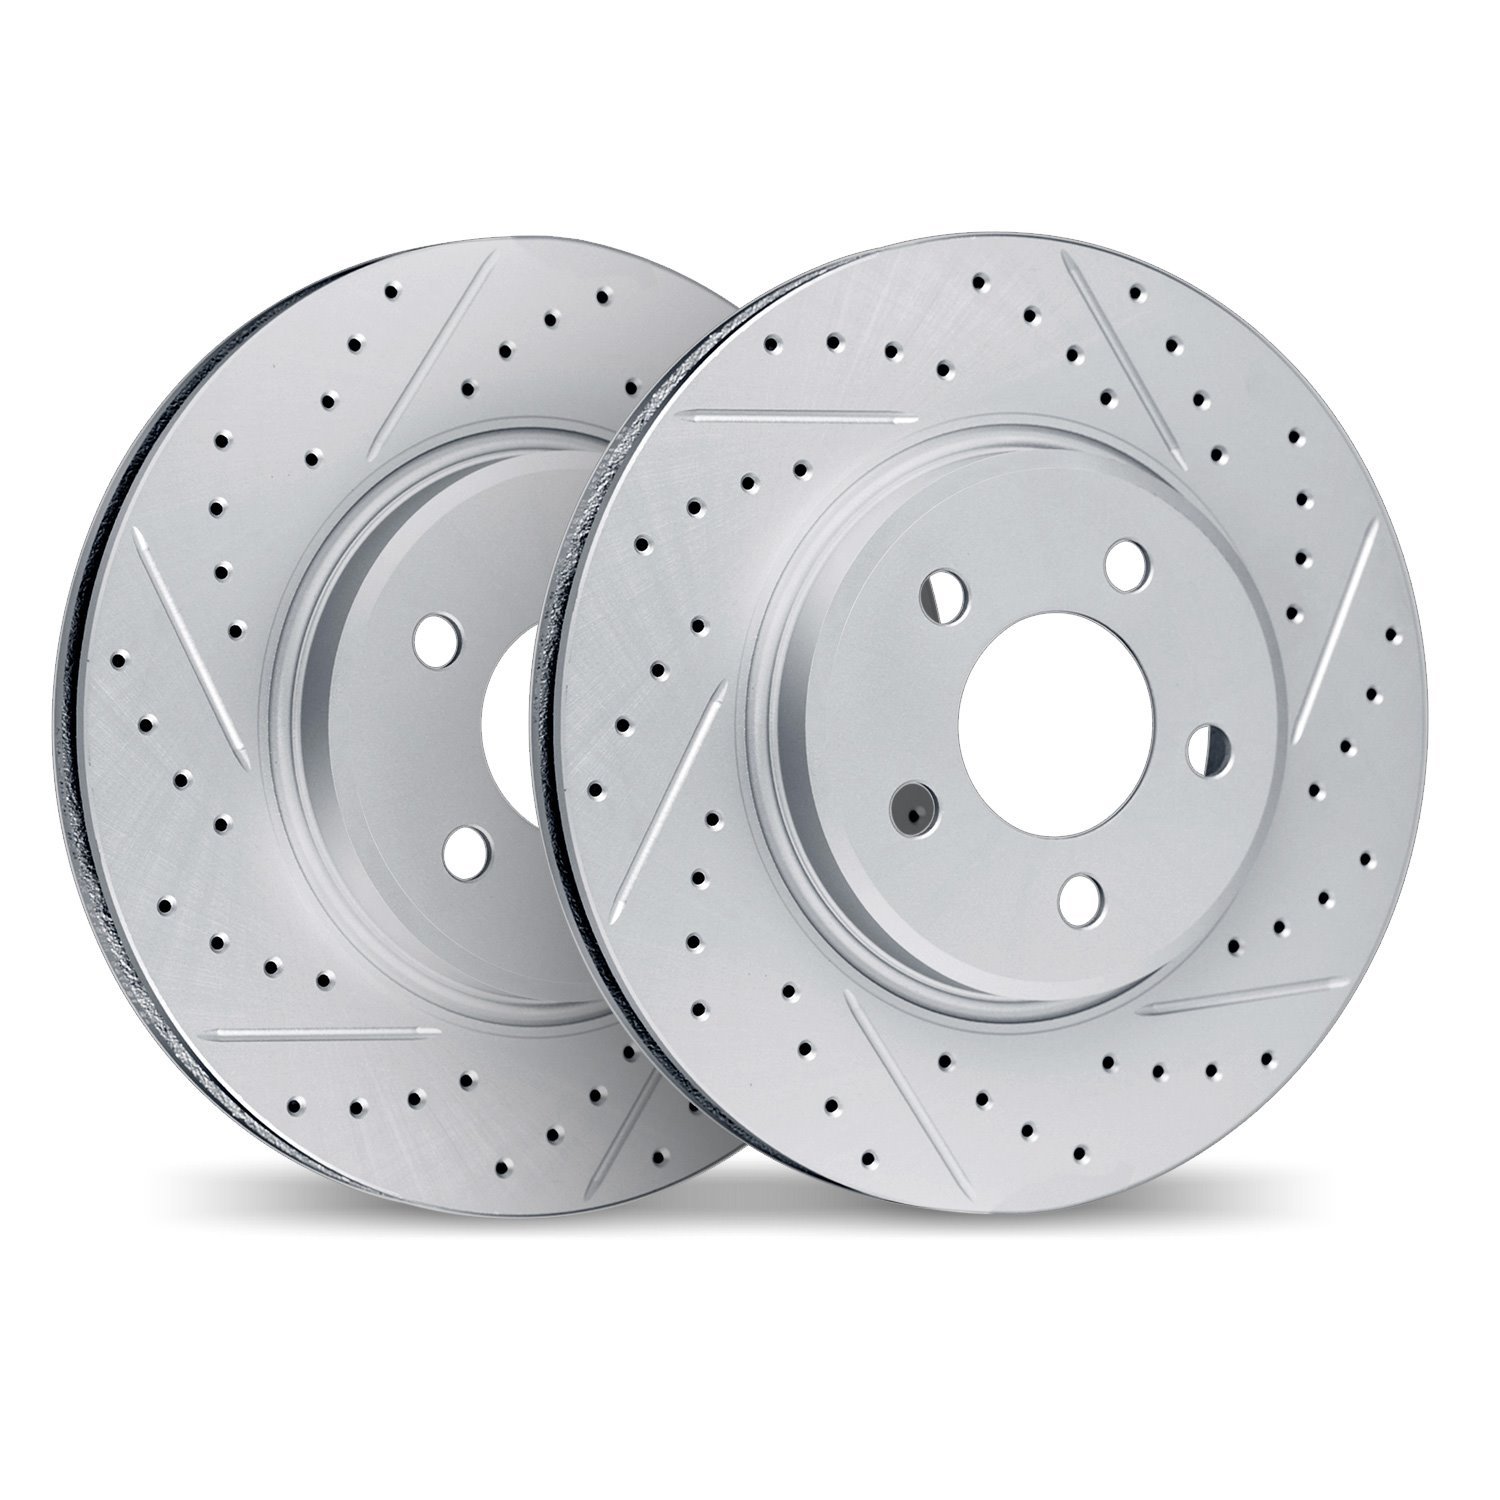 2002-59028 Geoperformance Drilled/Slotted Brake Rotors, 2006-2014 Acura/Honda, Position: Front